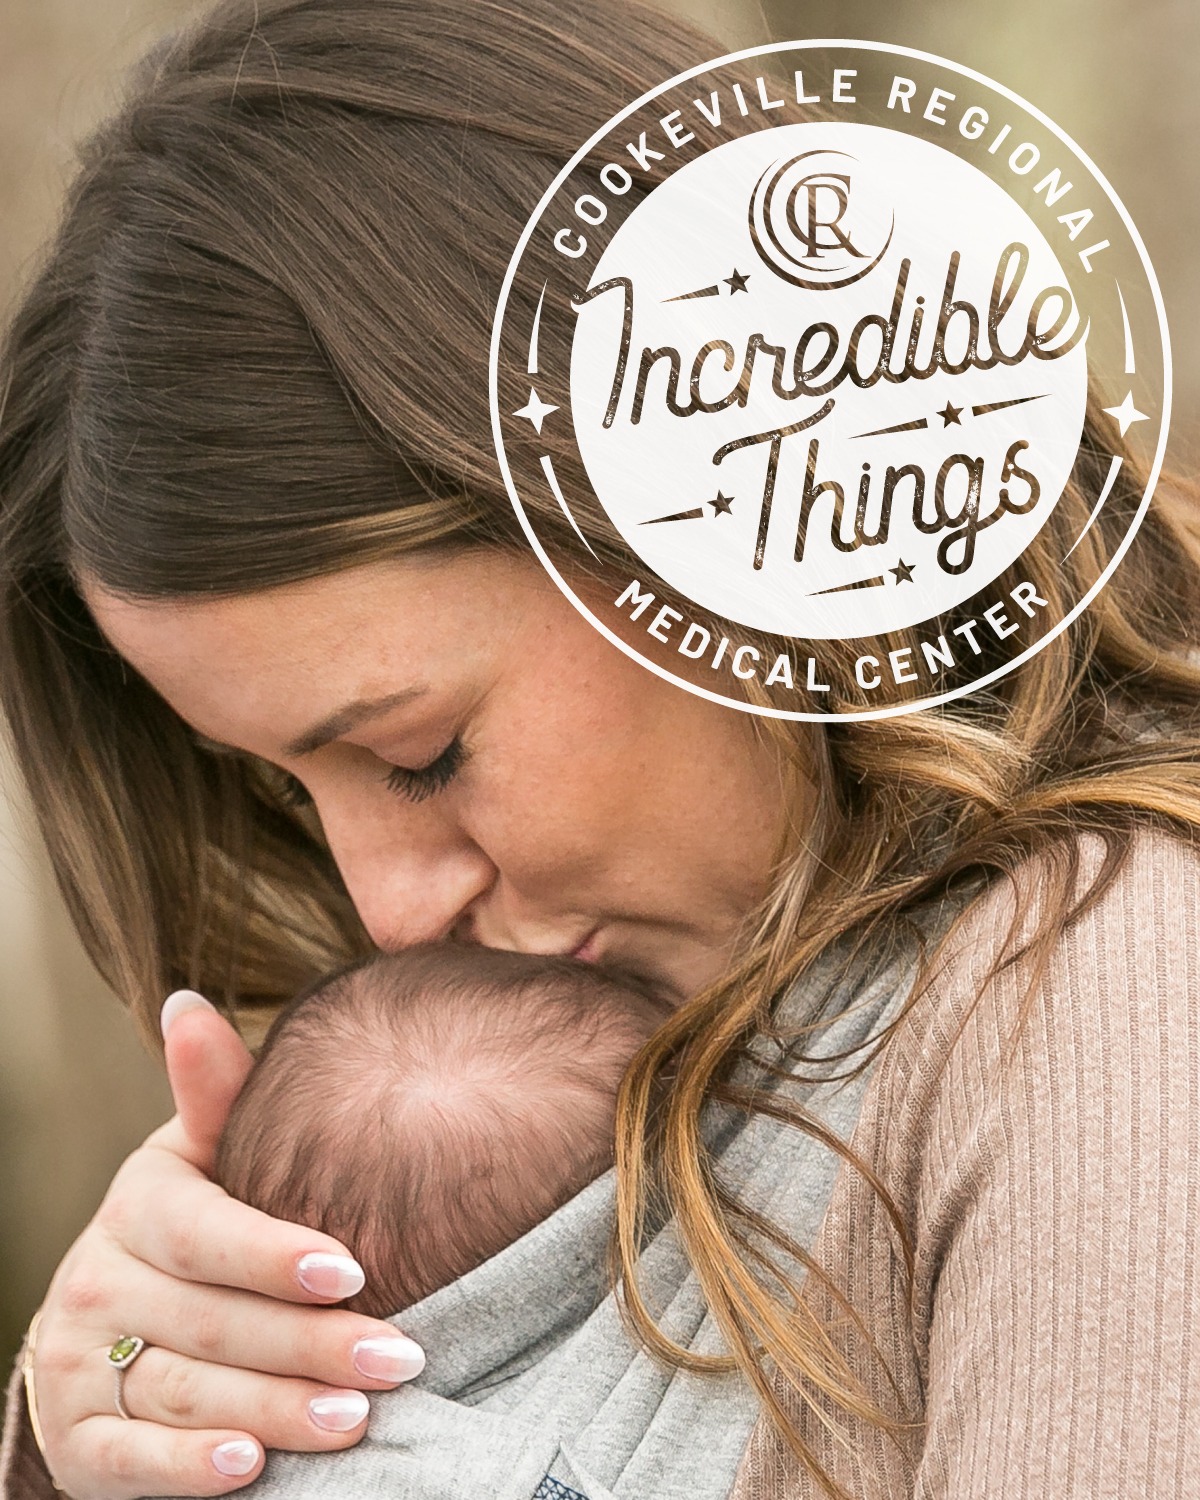 IncredibleThings - woman holding a baby